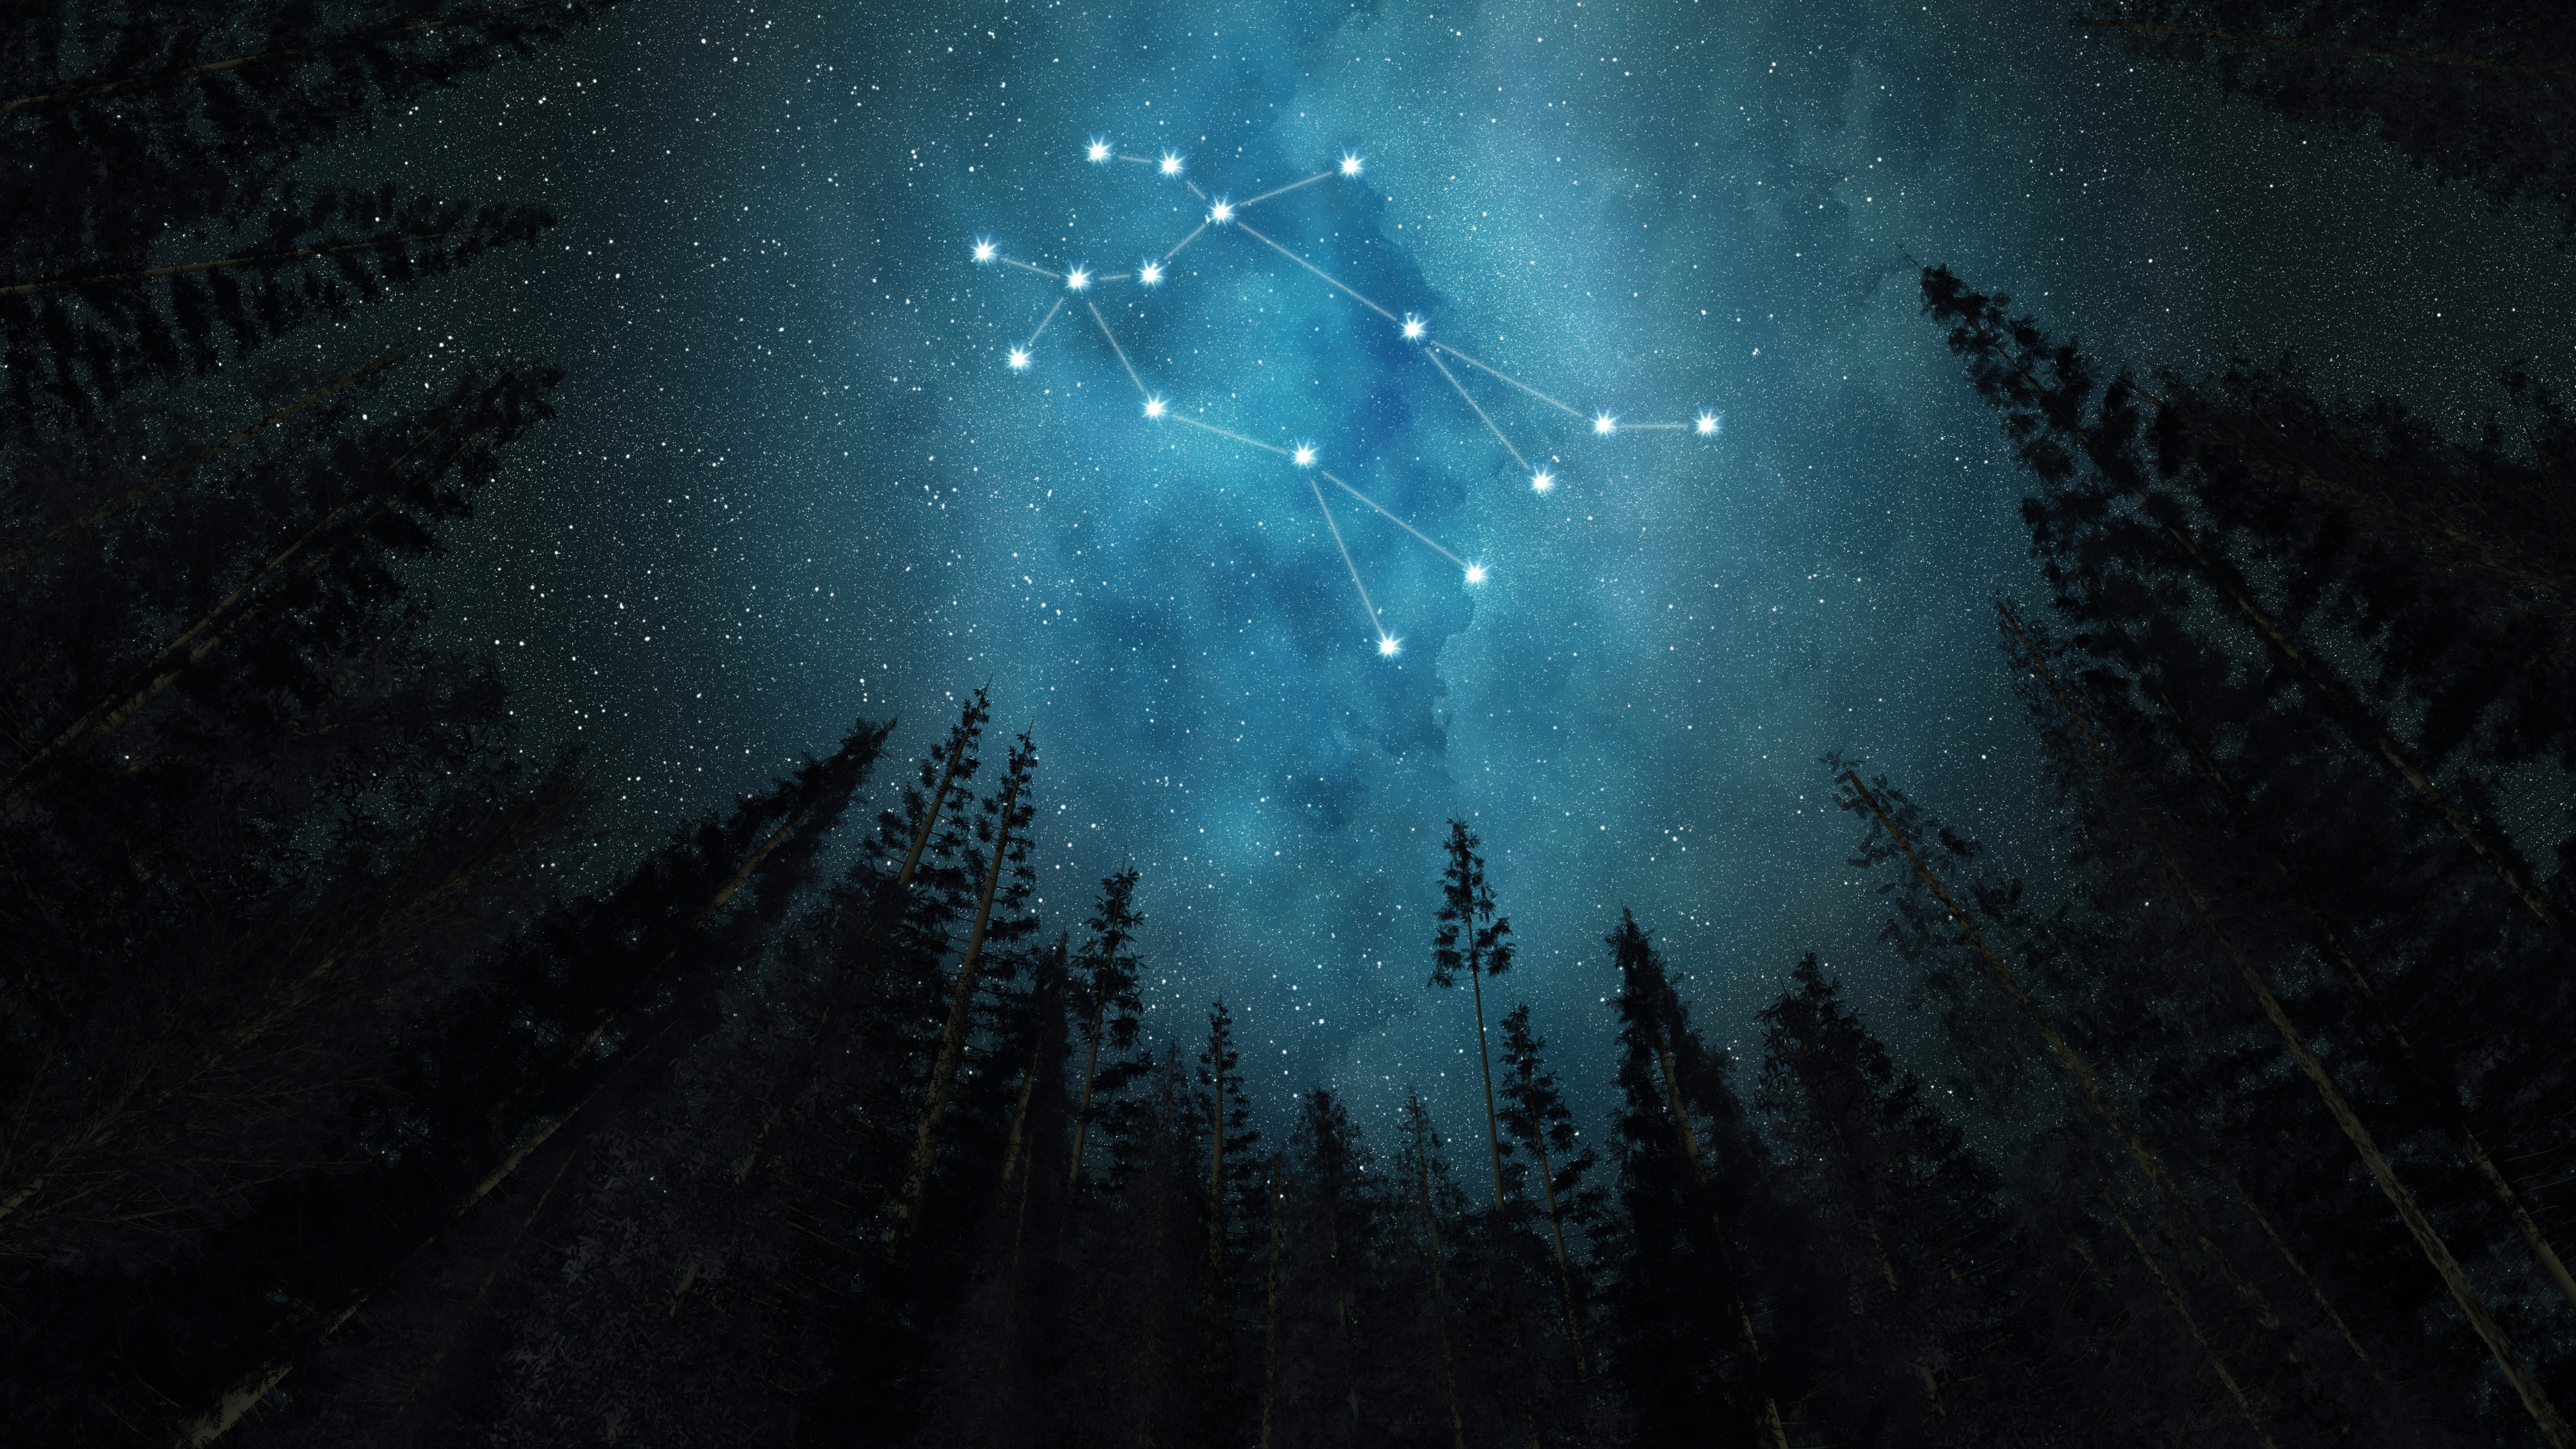 The constellation Gemini: the position of the stars has been accurately mapped by astronomers since ancient times and celestial navigation is  still considered to be highly reliable.  Photo credit: Shutterstock